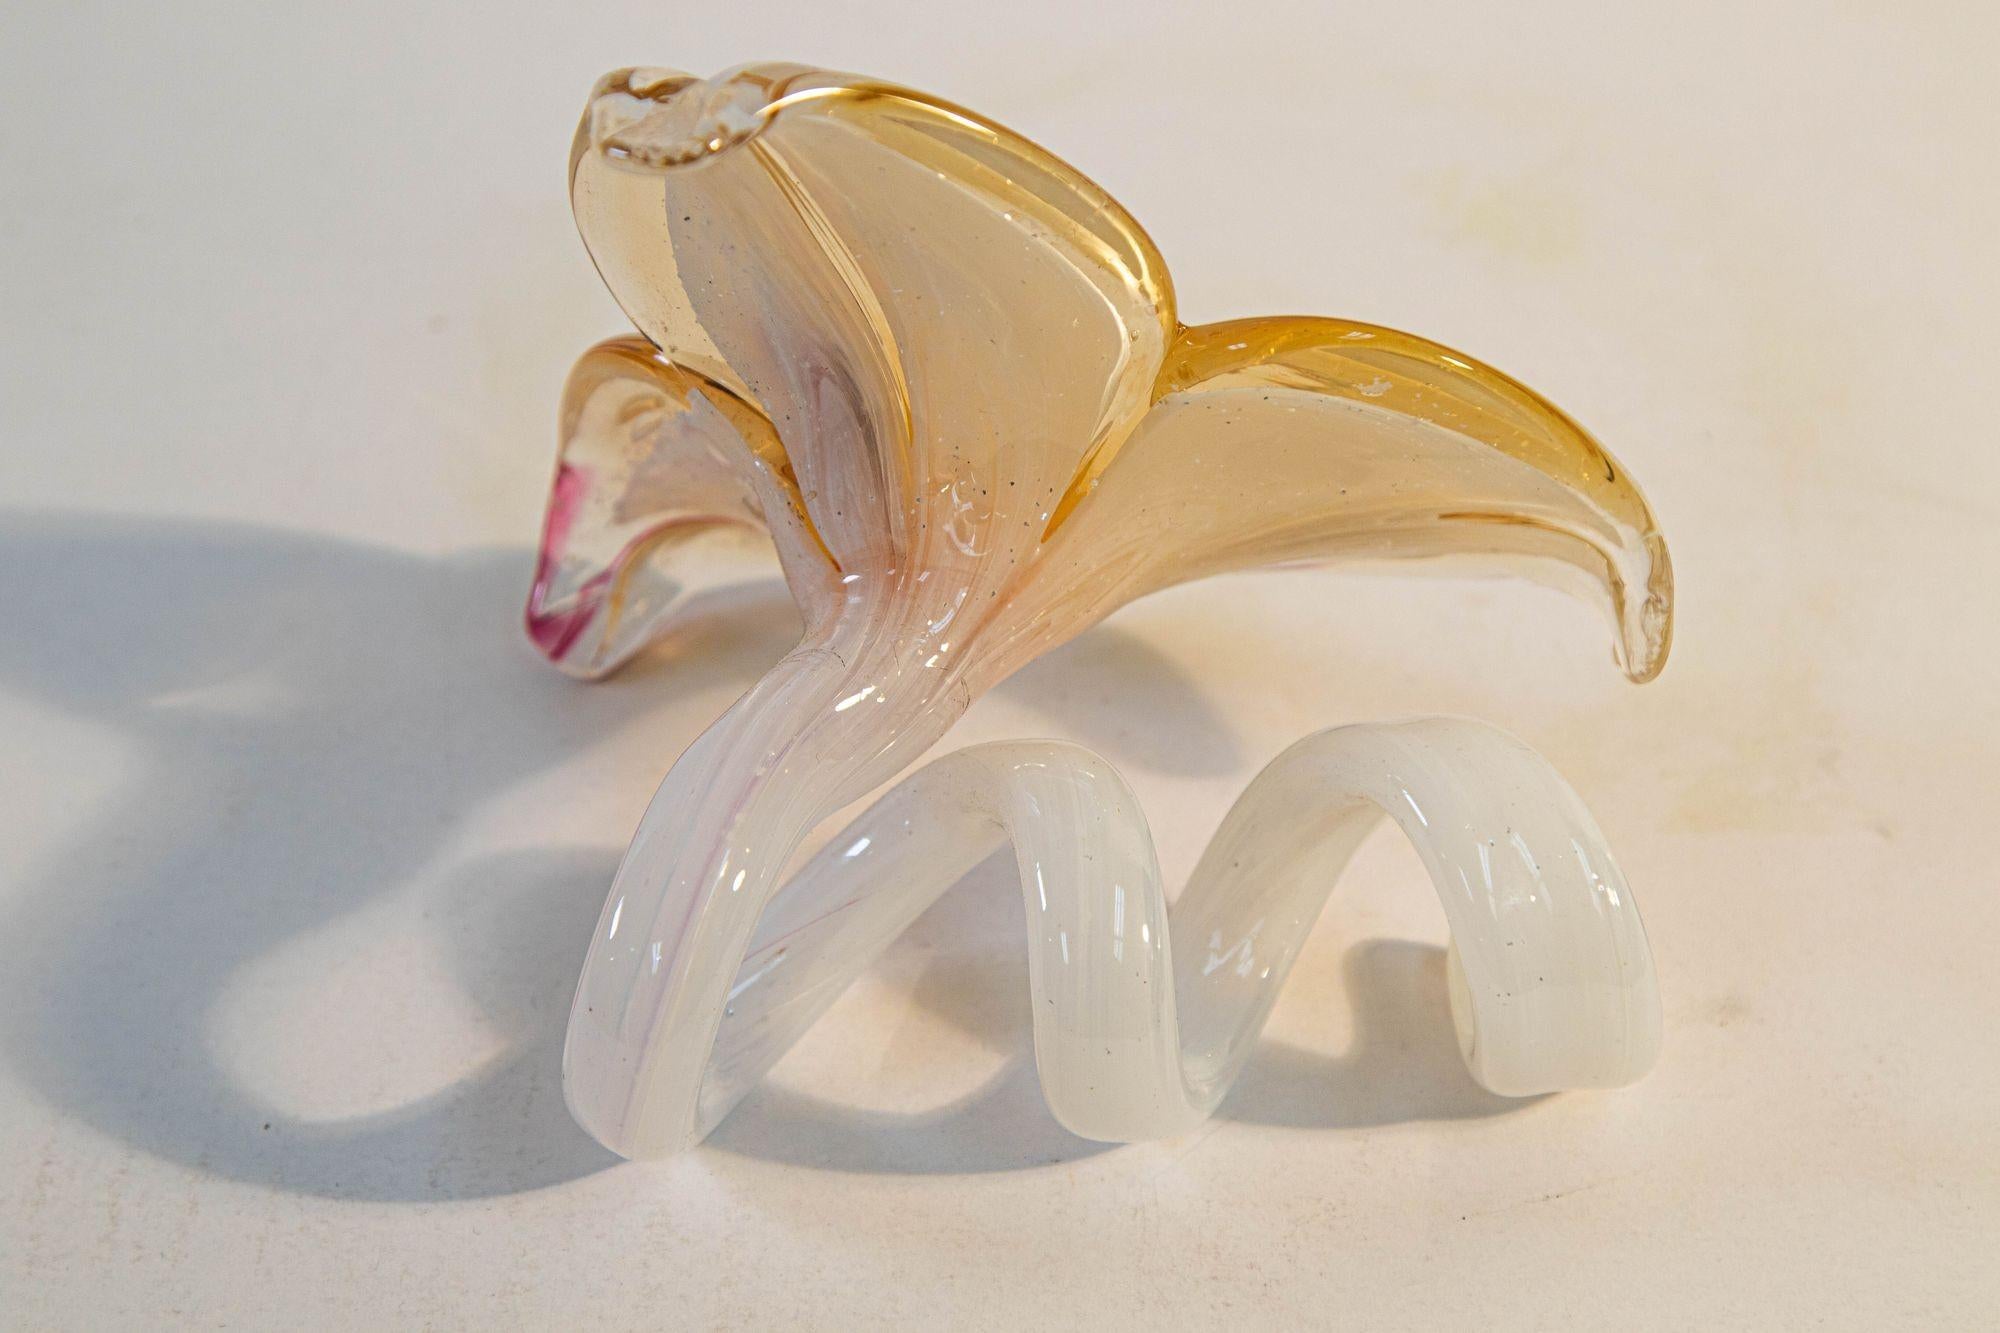 Italian Murano Art Glass Paperweight Lily Flower with Curled Stem Sculpture 1980 For Sale 3